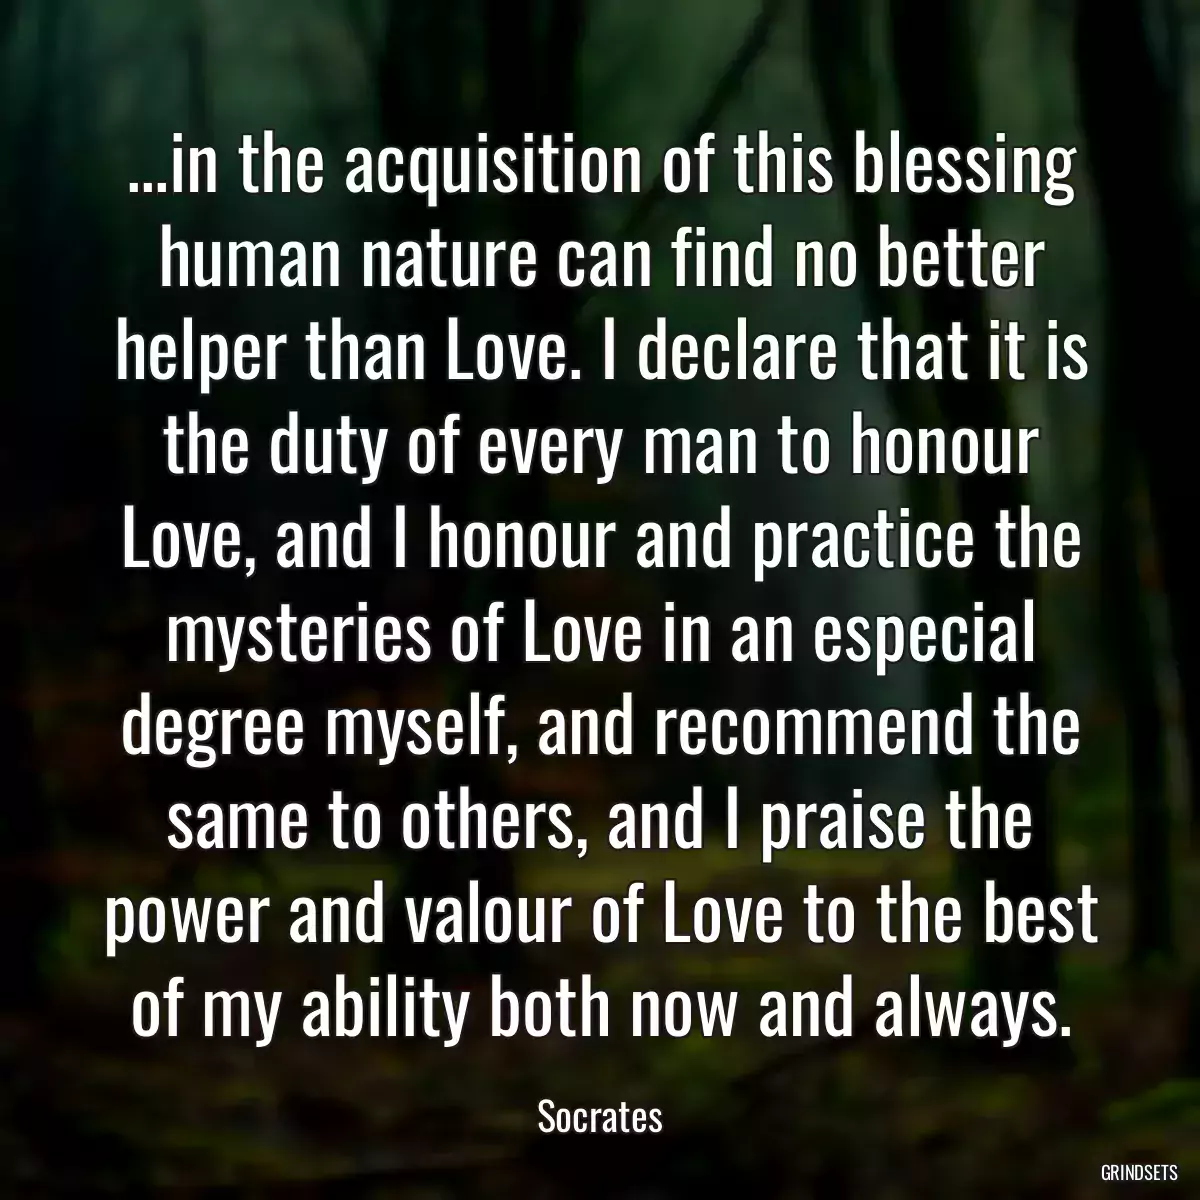 ...in the acquisition of this blessing human nature can find no better helper than Love. I declare that it is the duty of every man to honour Love, and I honour and practice the mysteries of Love in an especial degree myself, and recommend the same to others, and I praise the power and valour of Love to the best of my ability both now and always.